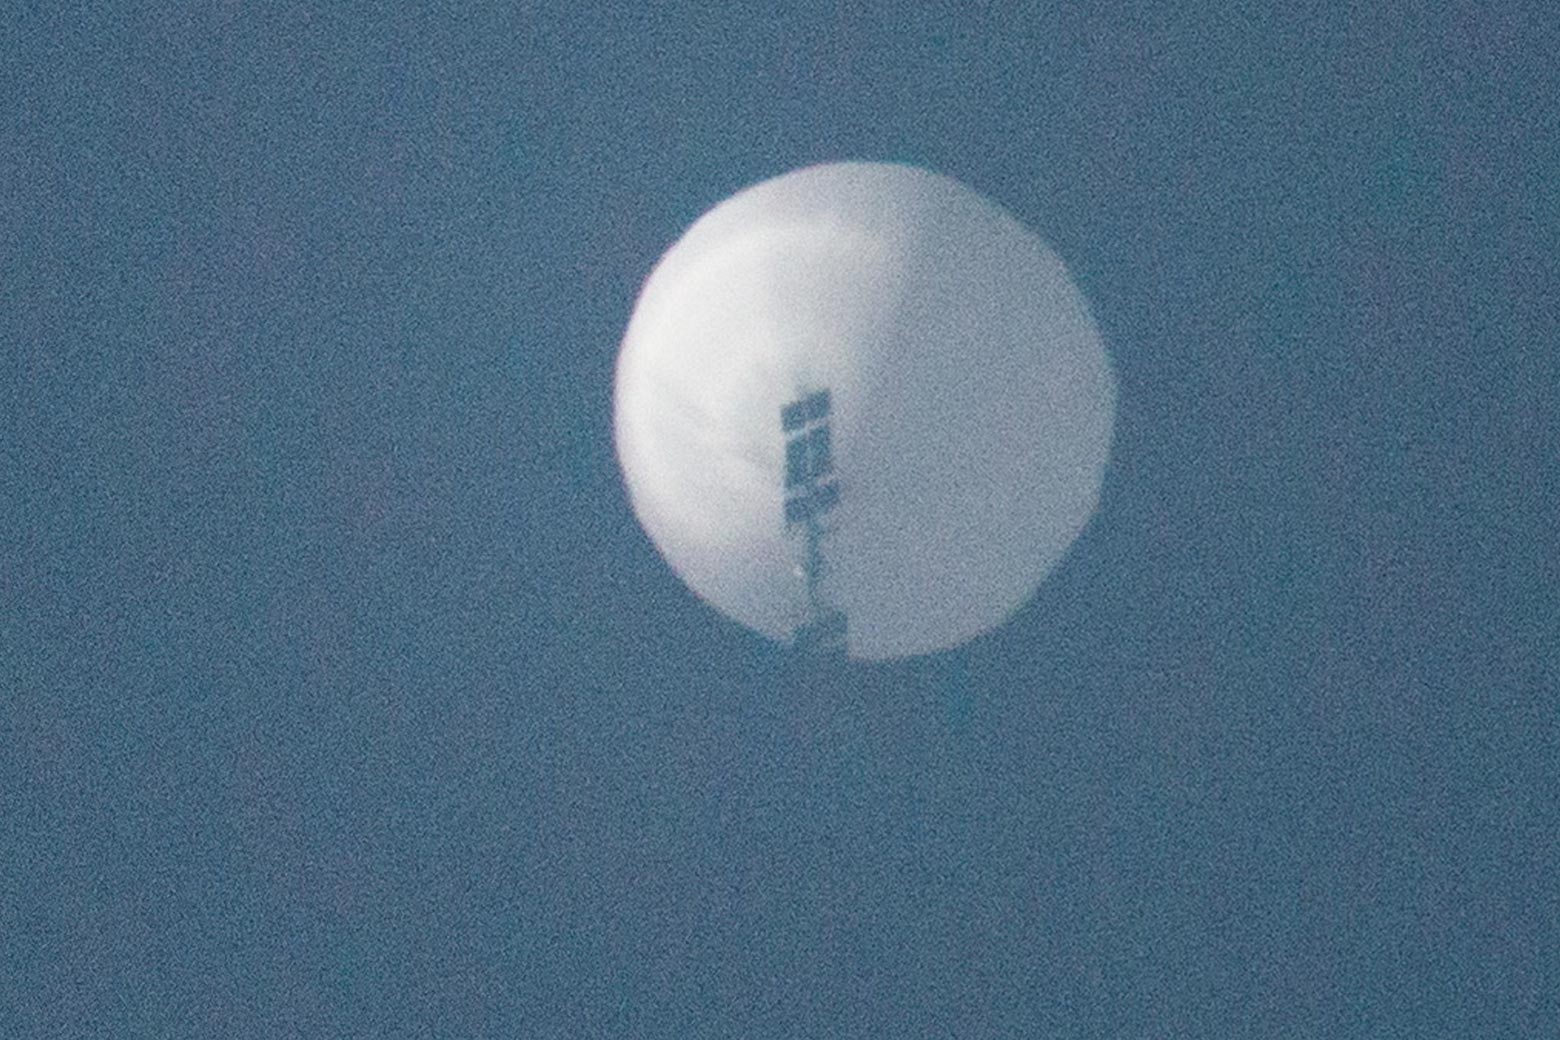 A blurry image of a large white balloon, under which black mechanical equipment is hanging, against a blue sky.